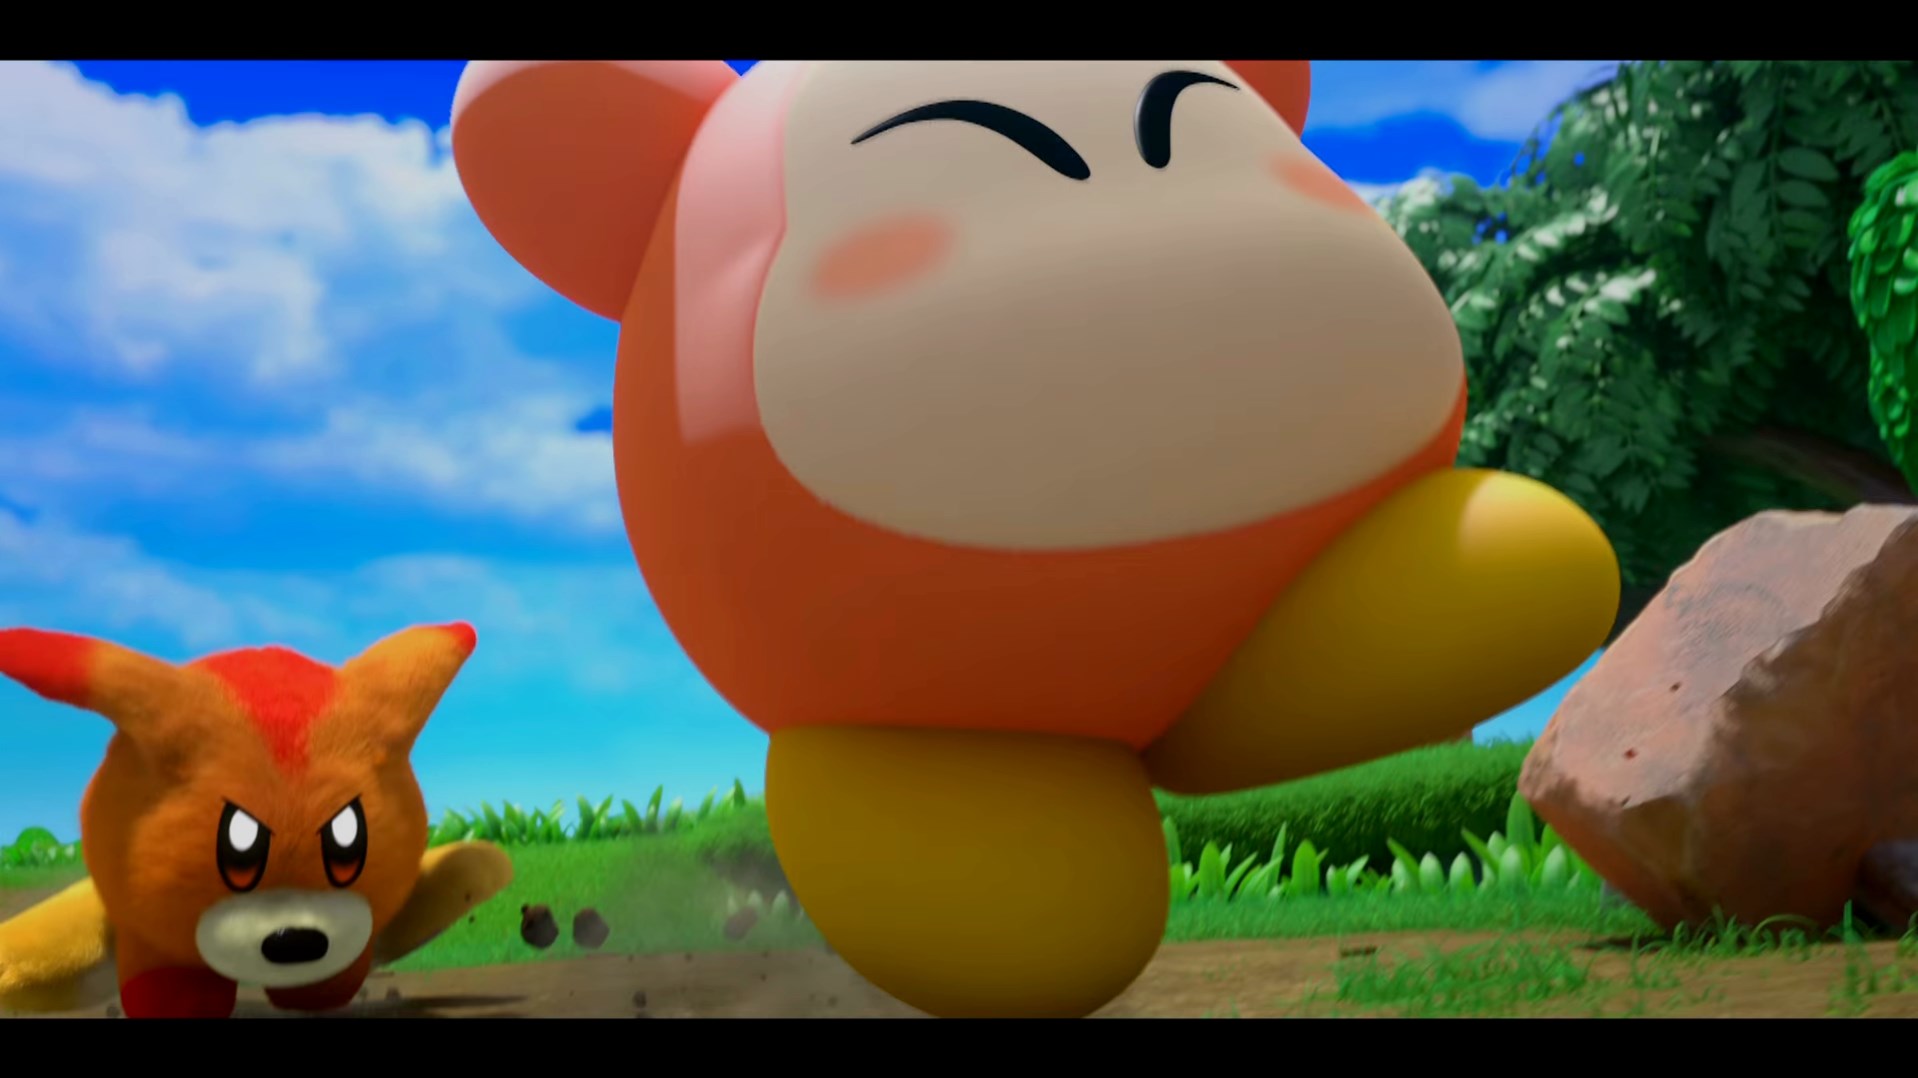 A Waddle Dee runs away from a chasing dog